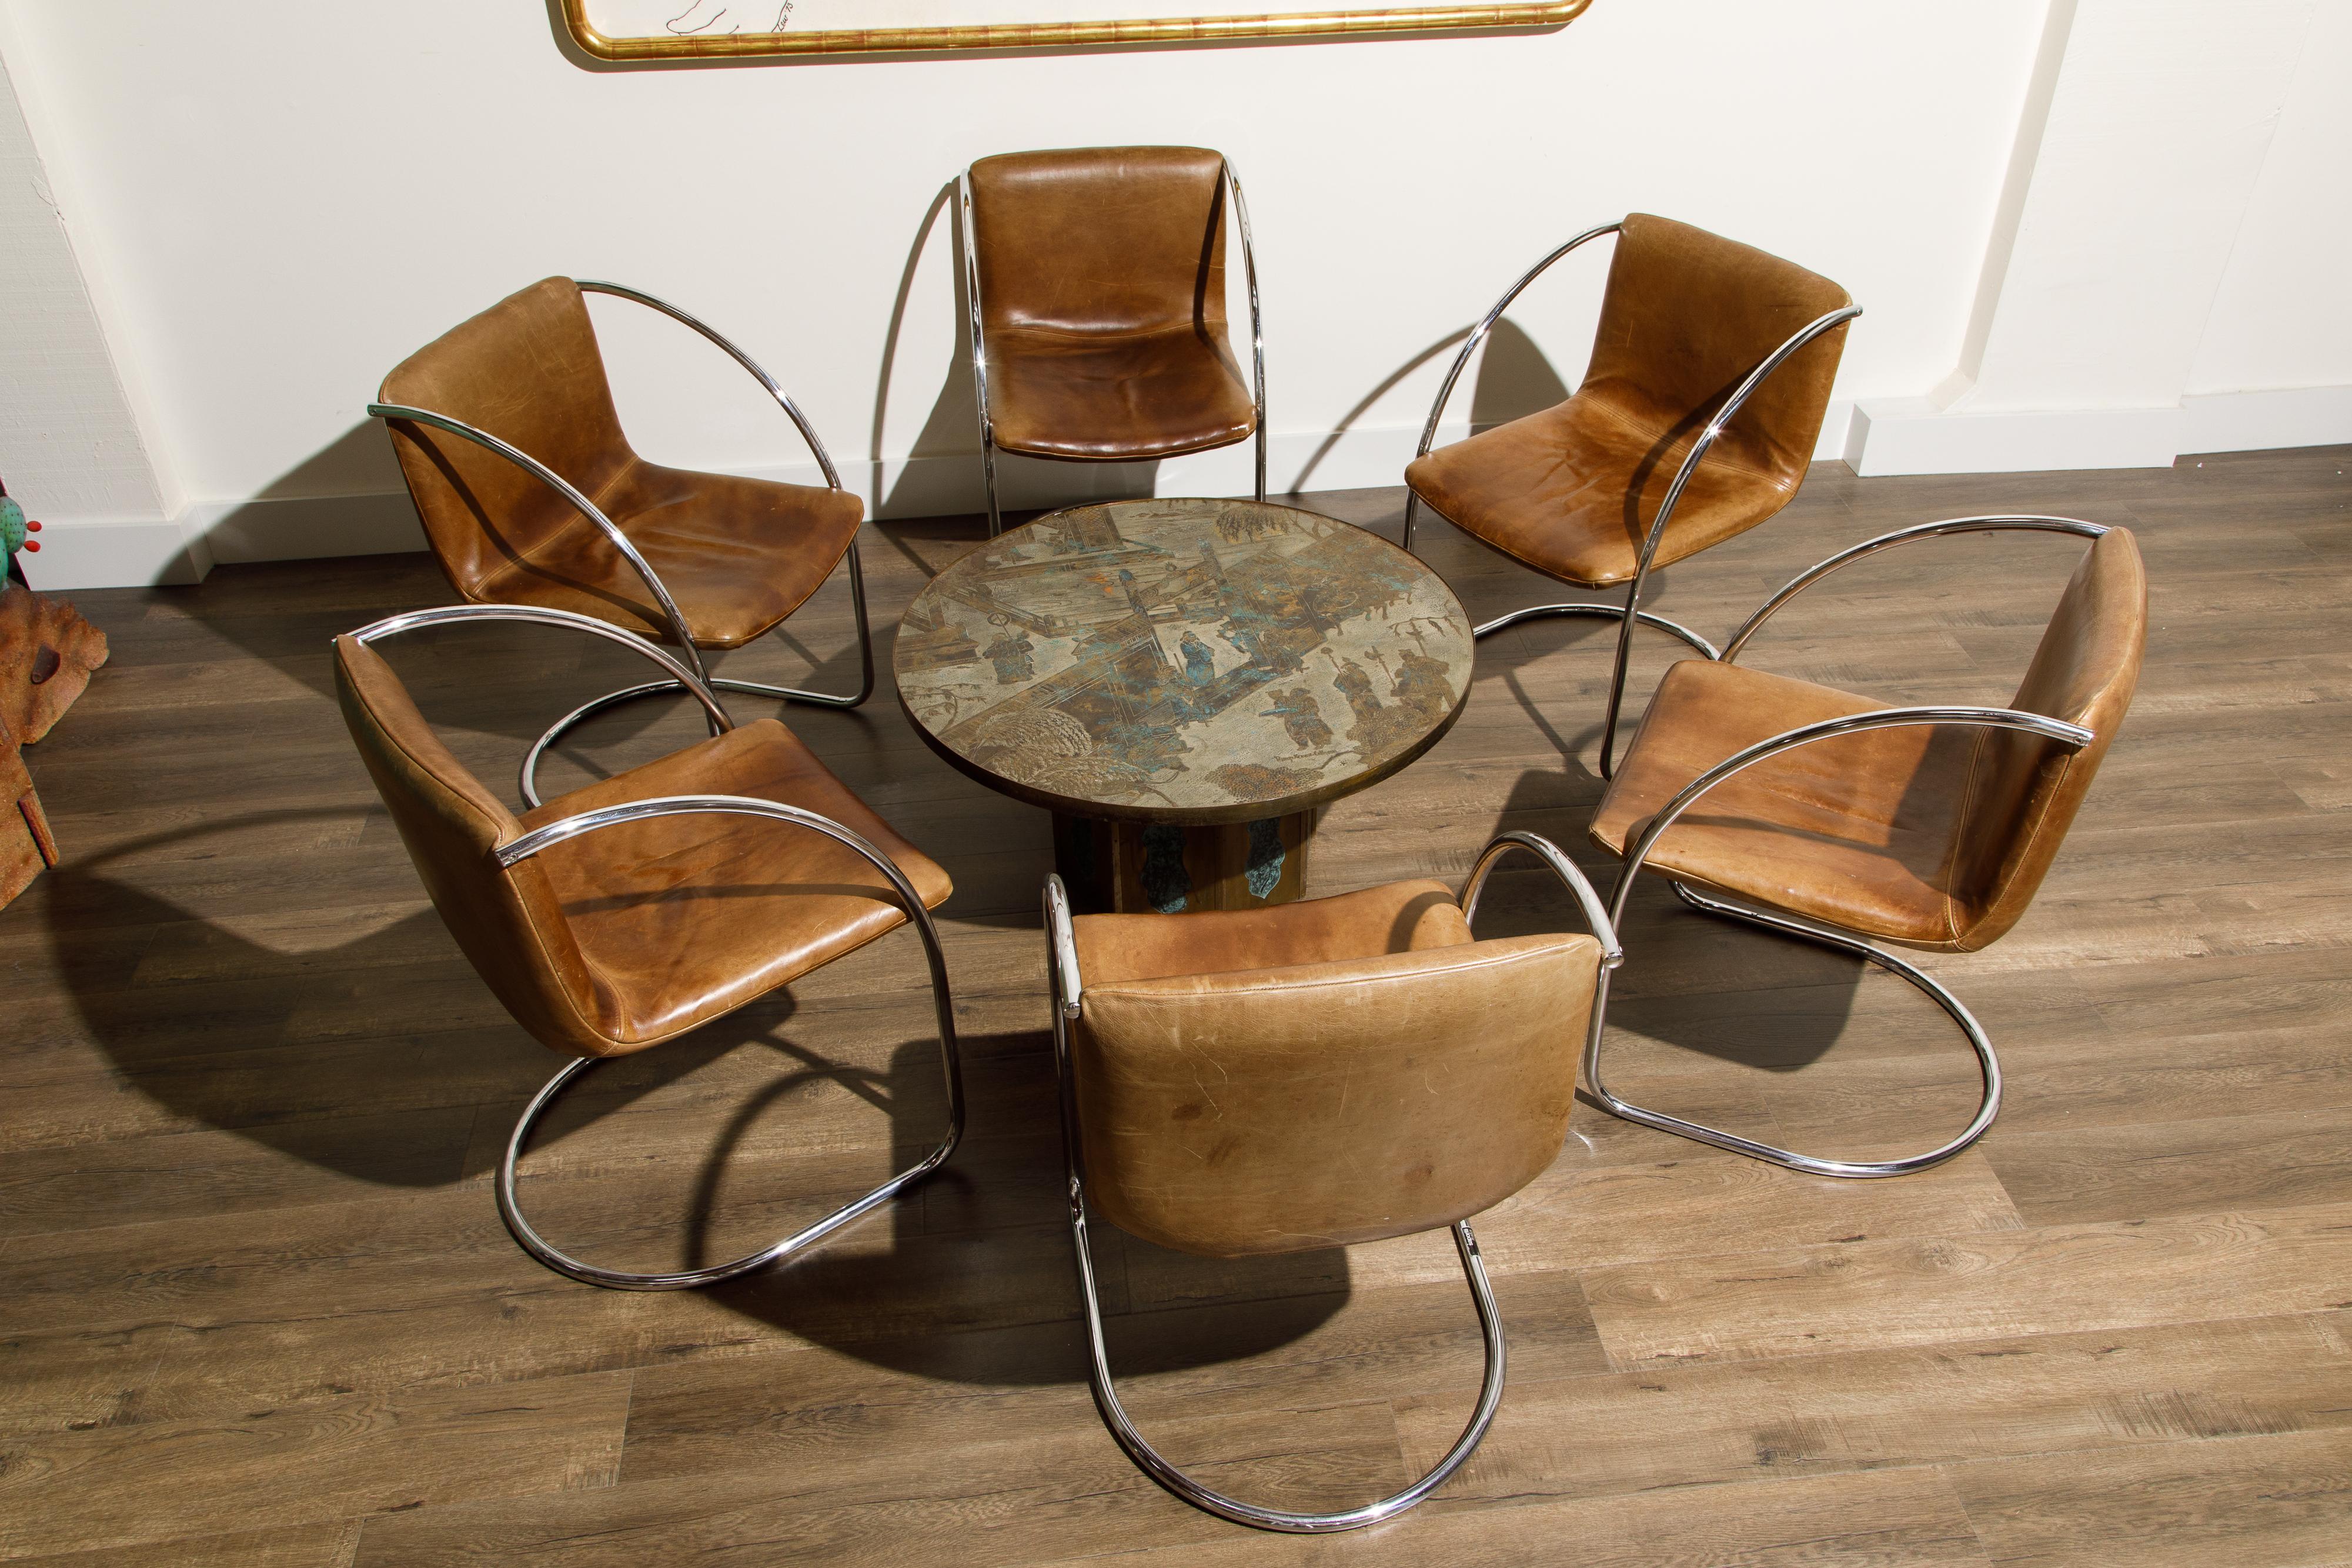 'Lens' Leather Chairs by Giovanni Offredi for Saporiti Italia, c. 1968, Signed 11